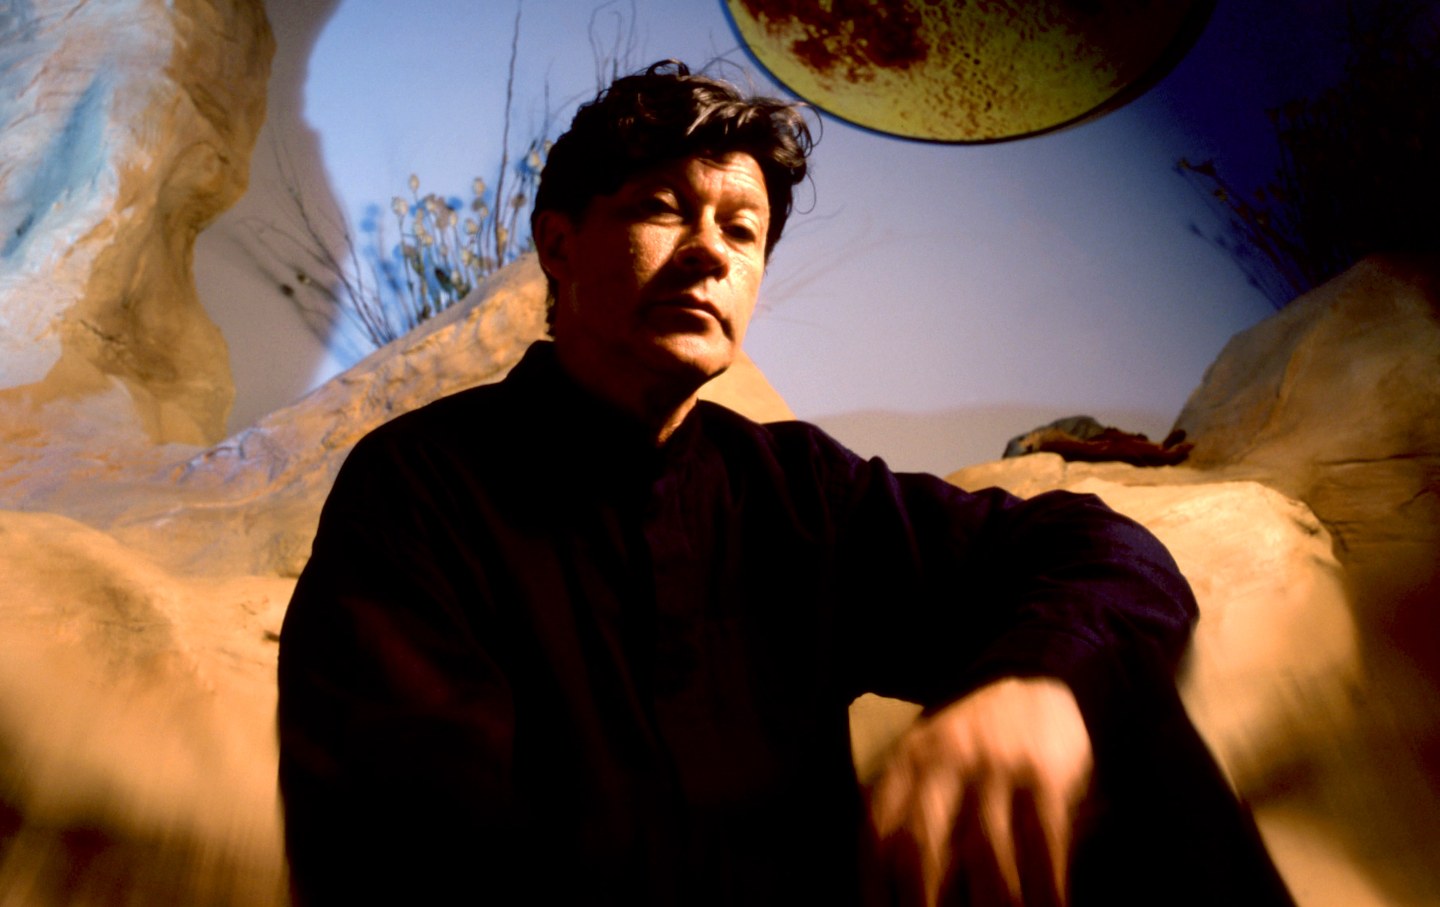 Robbie Robertson circa November 1994 at The National Museum of the American Indian in New York City.